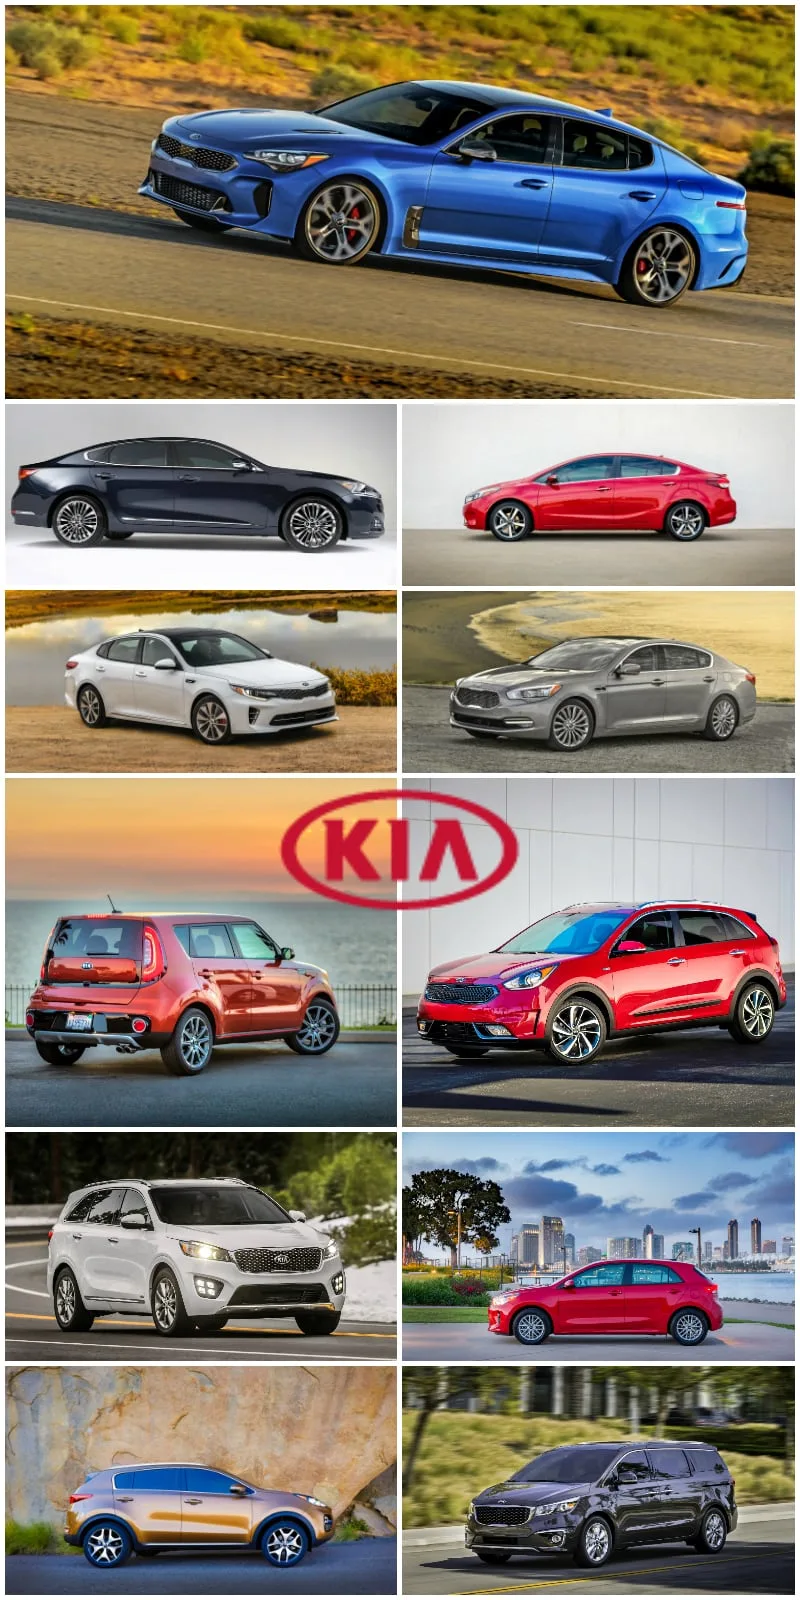 Kia and Reliability - A Moment of Personal Validation